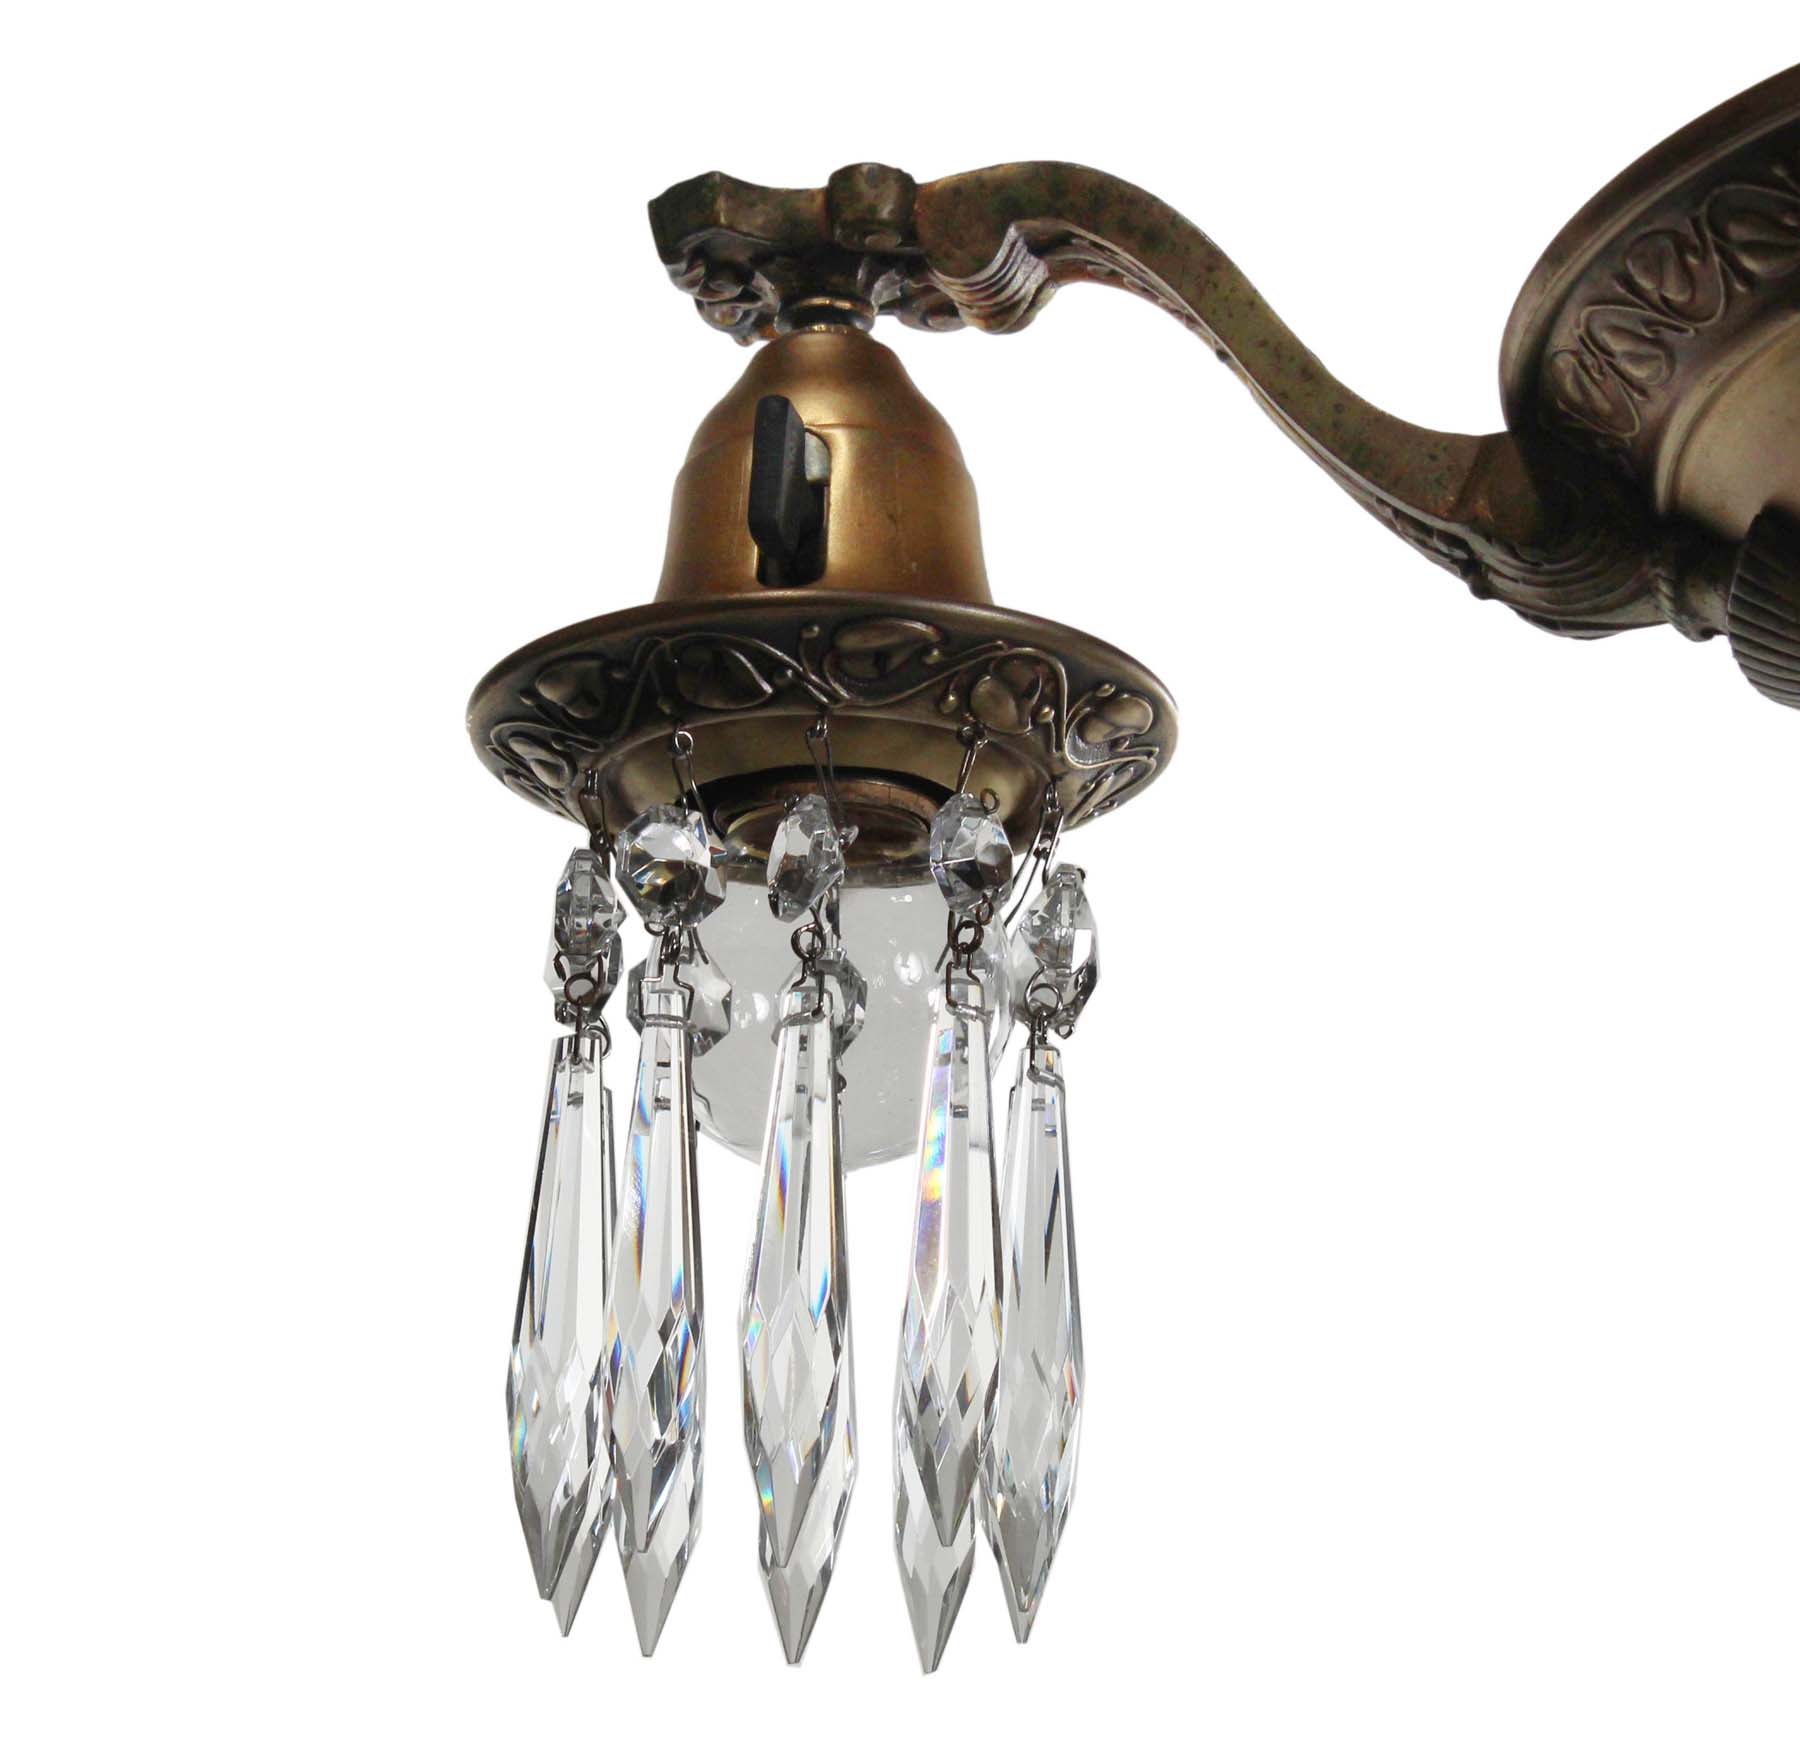 SOLD Antique Brass Four-Light Chandelier with Prisms-68432